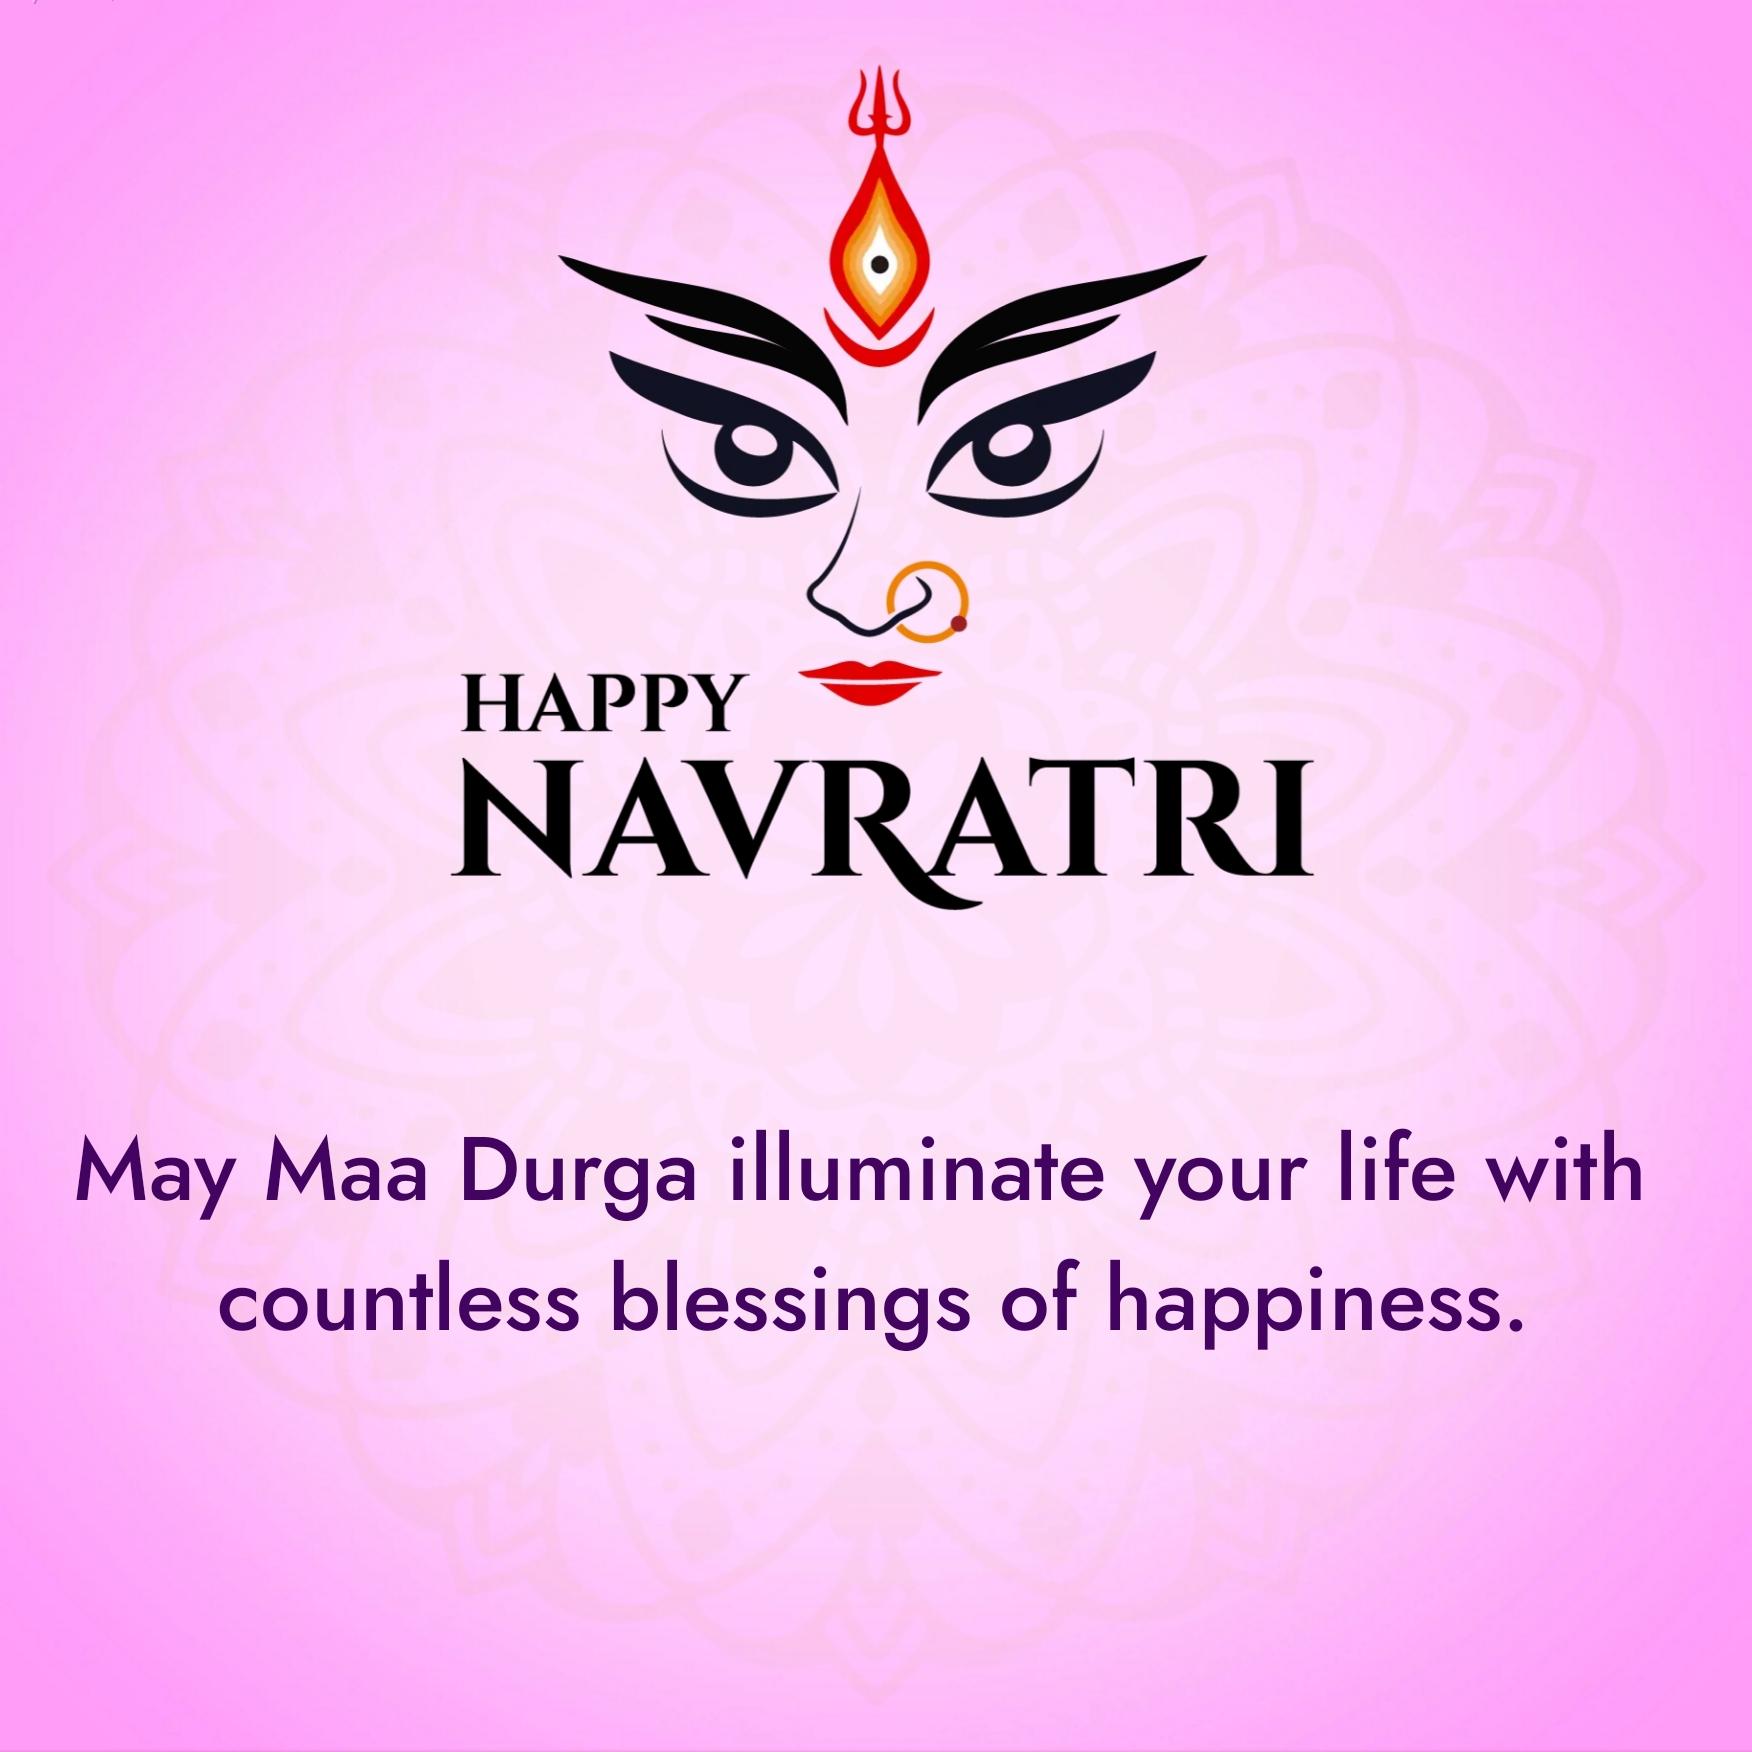 May Maa Durga illuminate your life with countless blessings